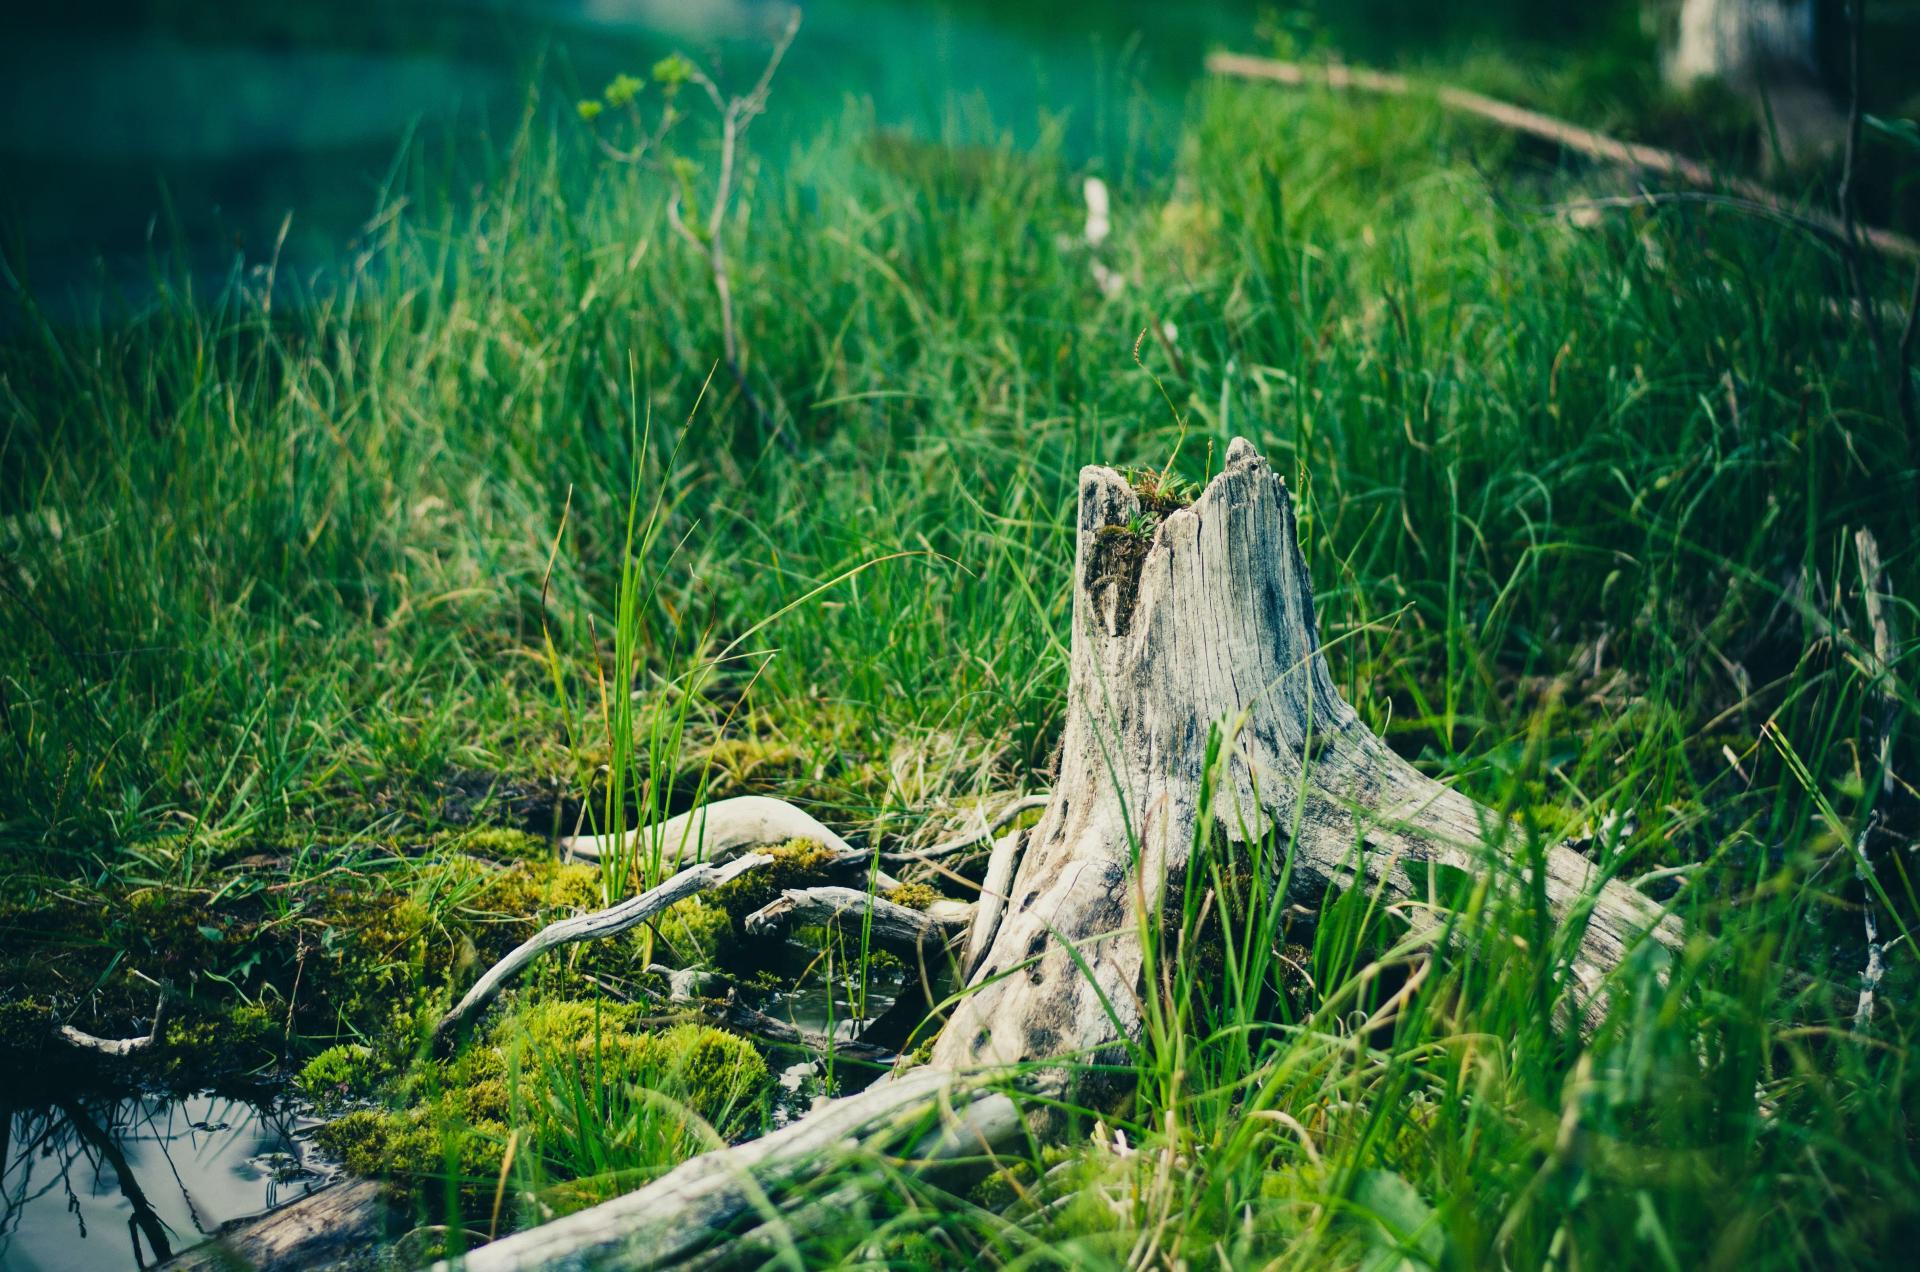 An Old Tree Stump in the Swamp